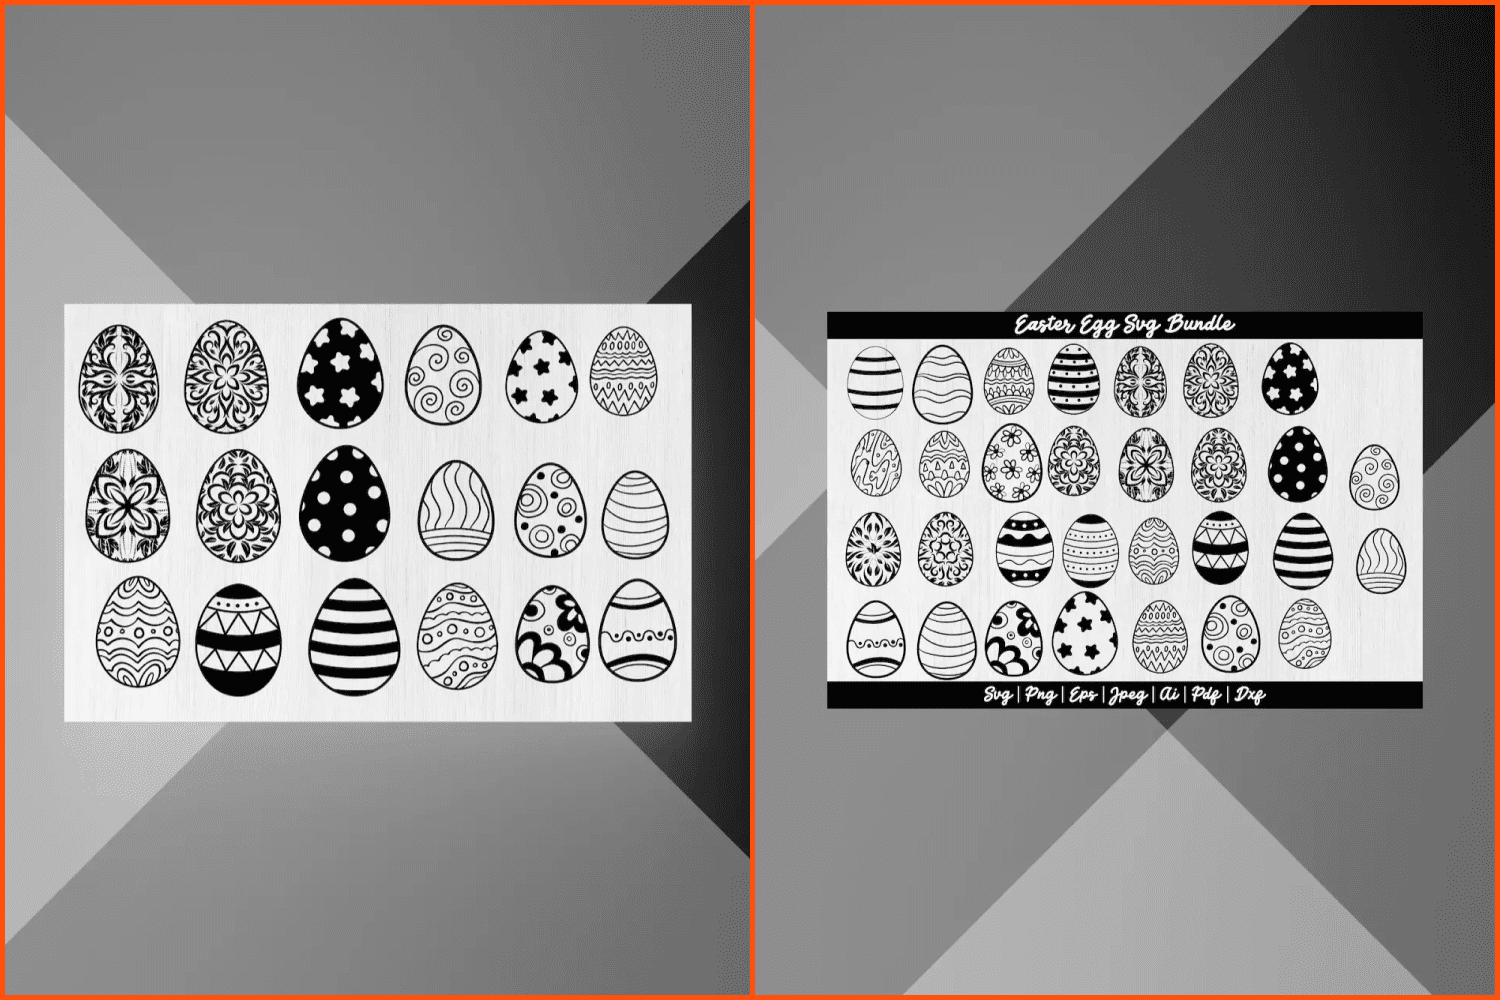 Patterns on the eggs.